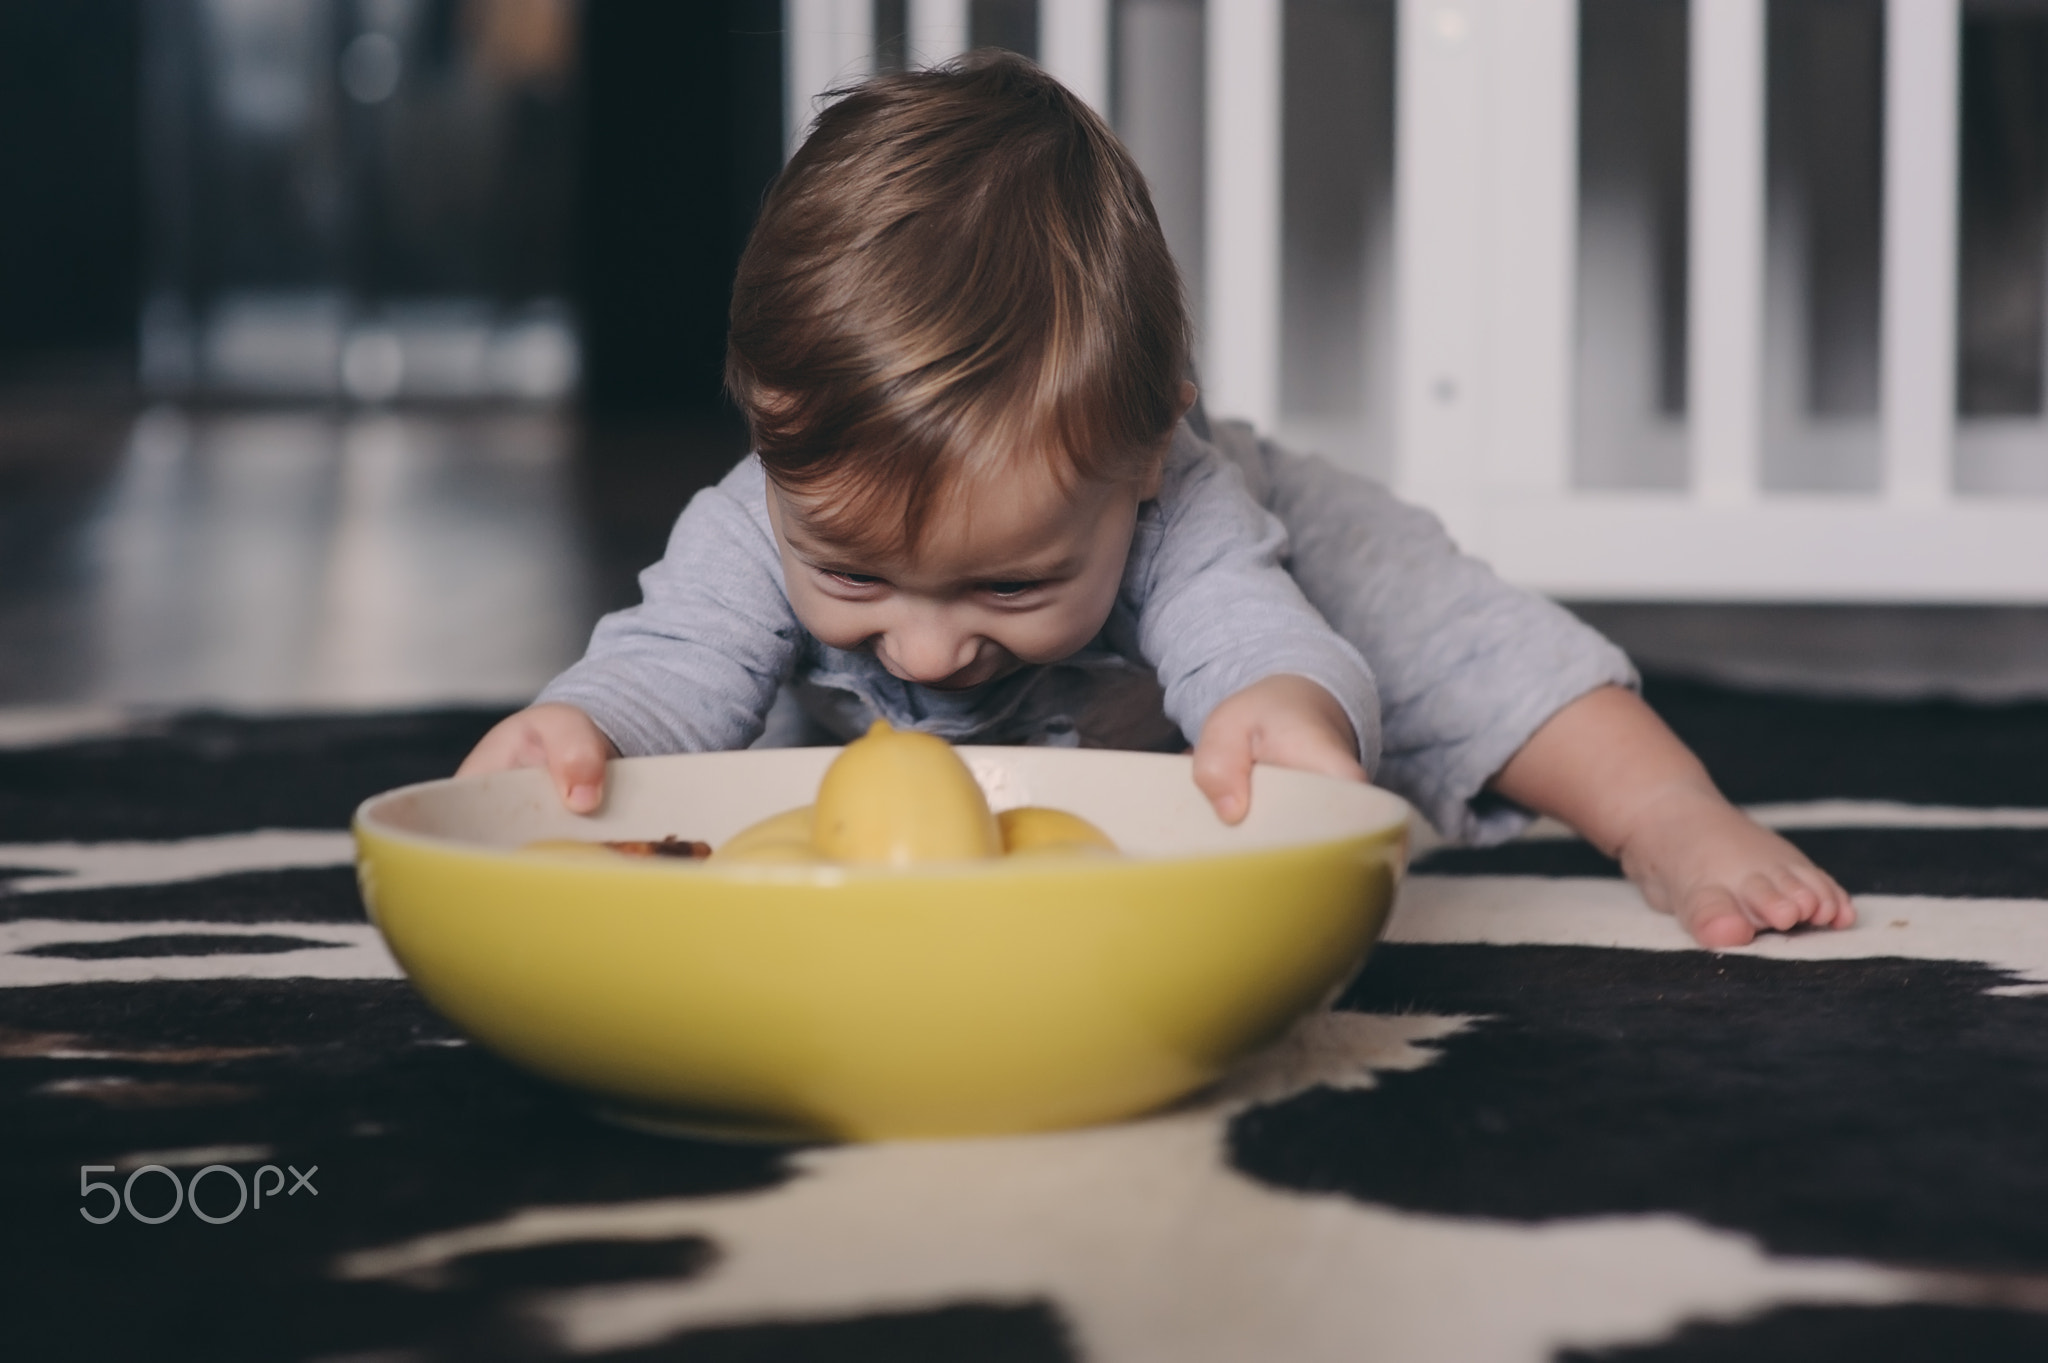 cute happy baby boy eating cookies at home and playing with plate of lemons. Lifestyle indoor...